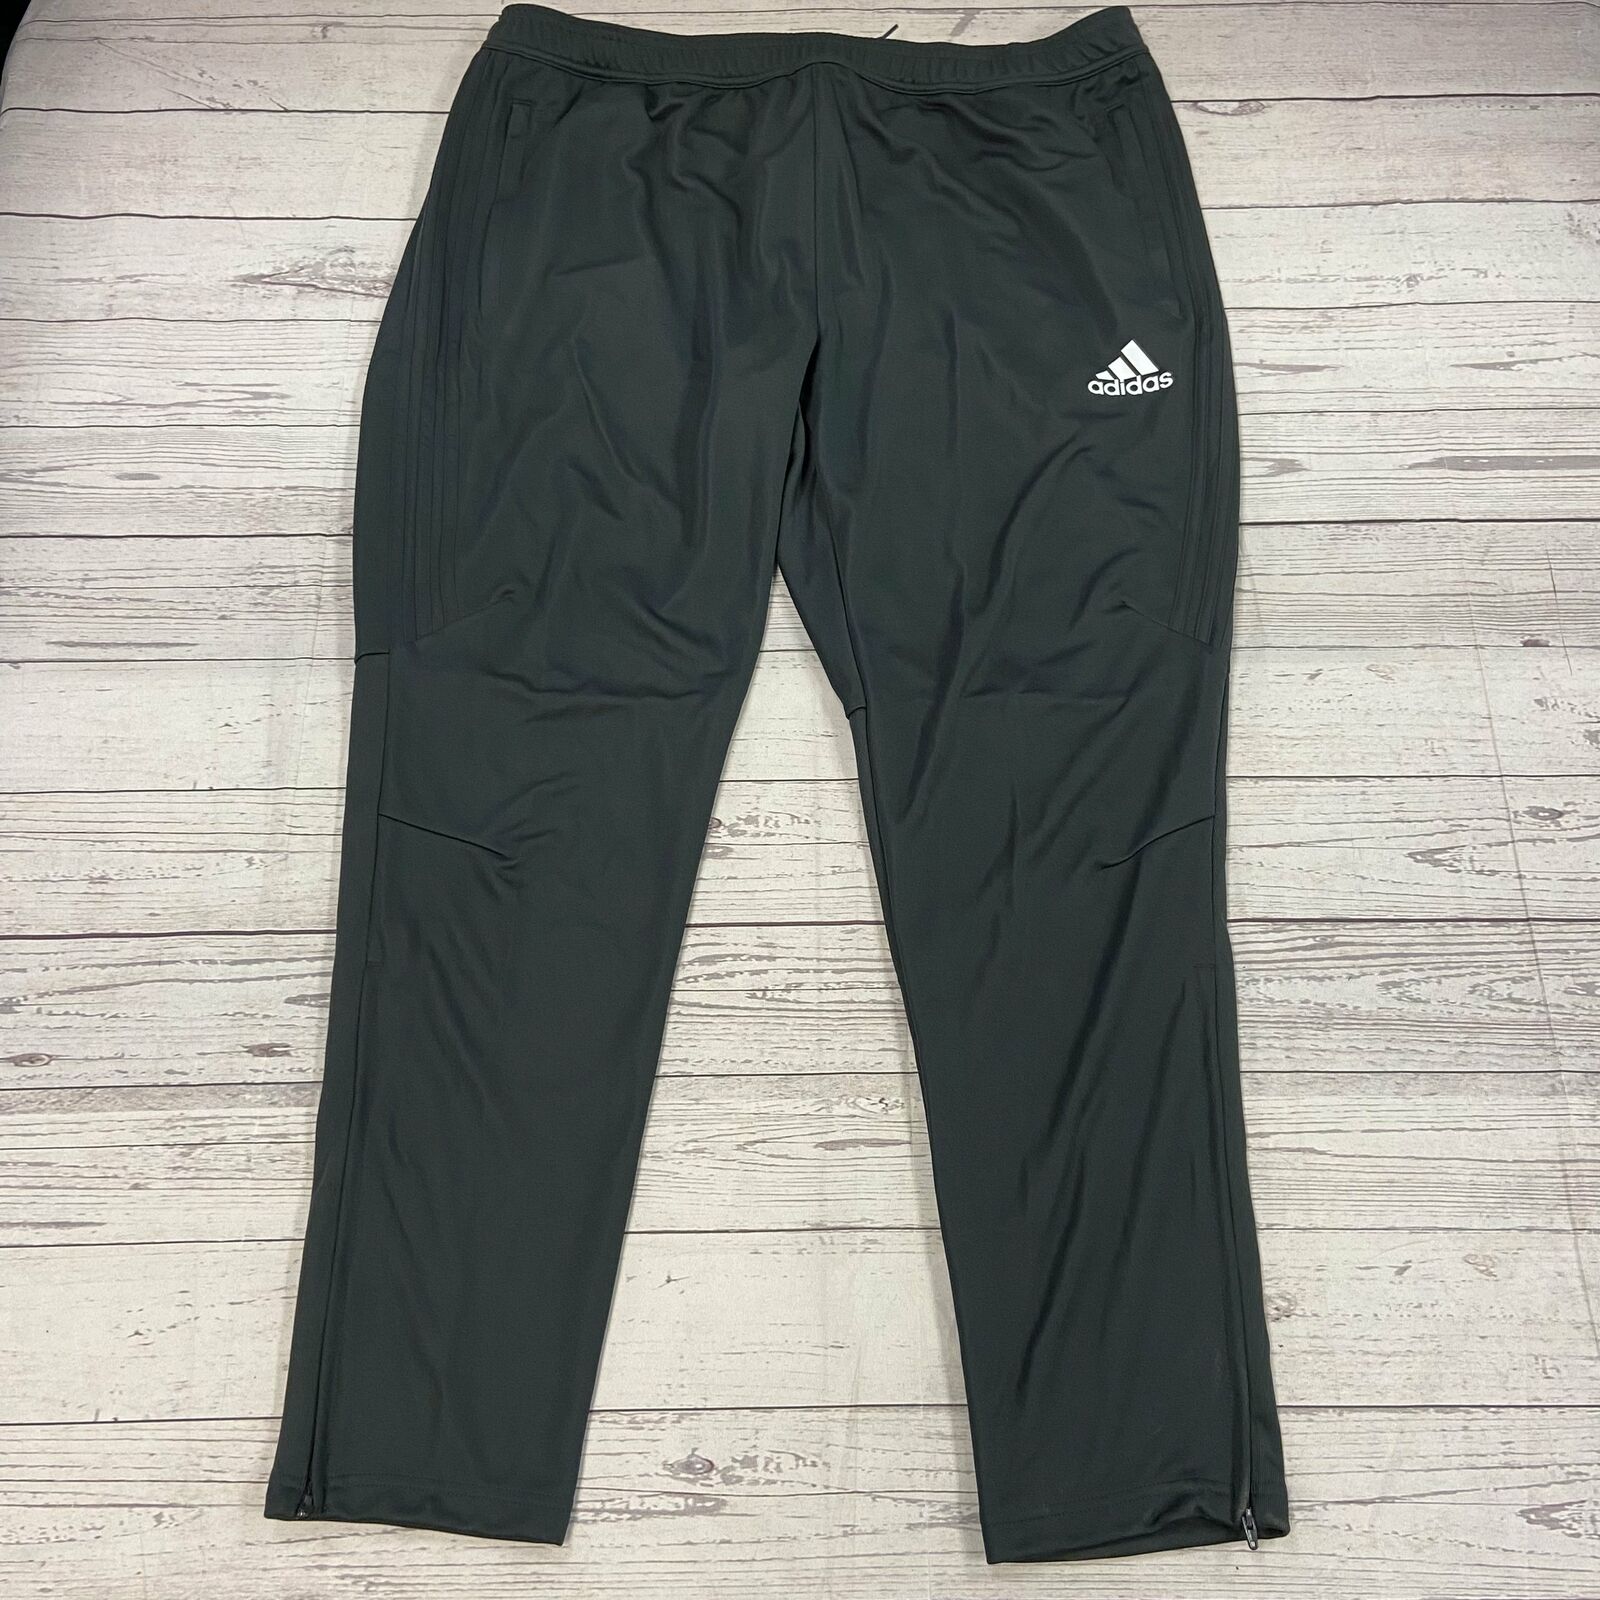 Adidas Gray Basketball Ankle Zip Track Pants Men Size 2XL NEW  *